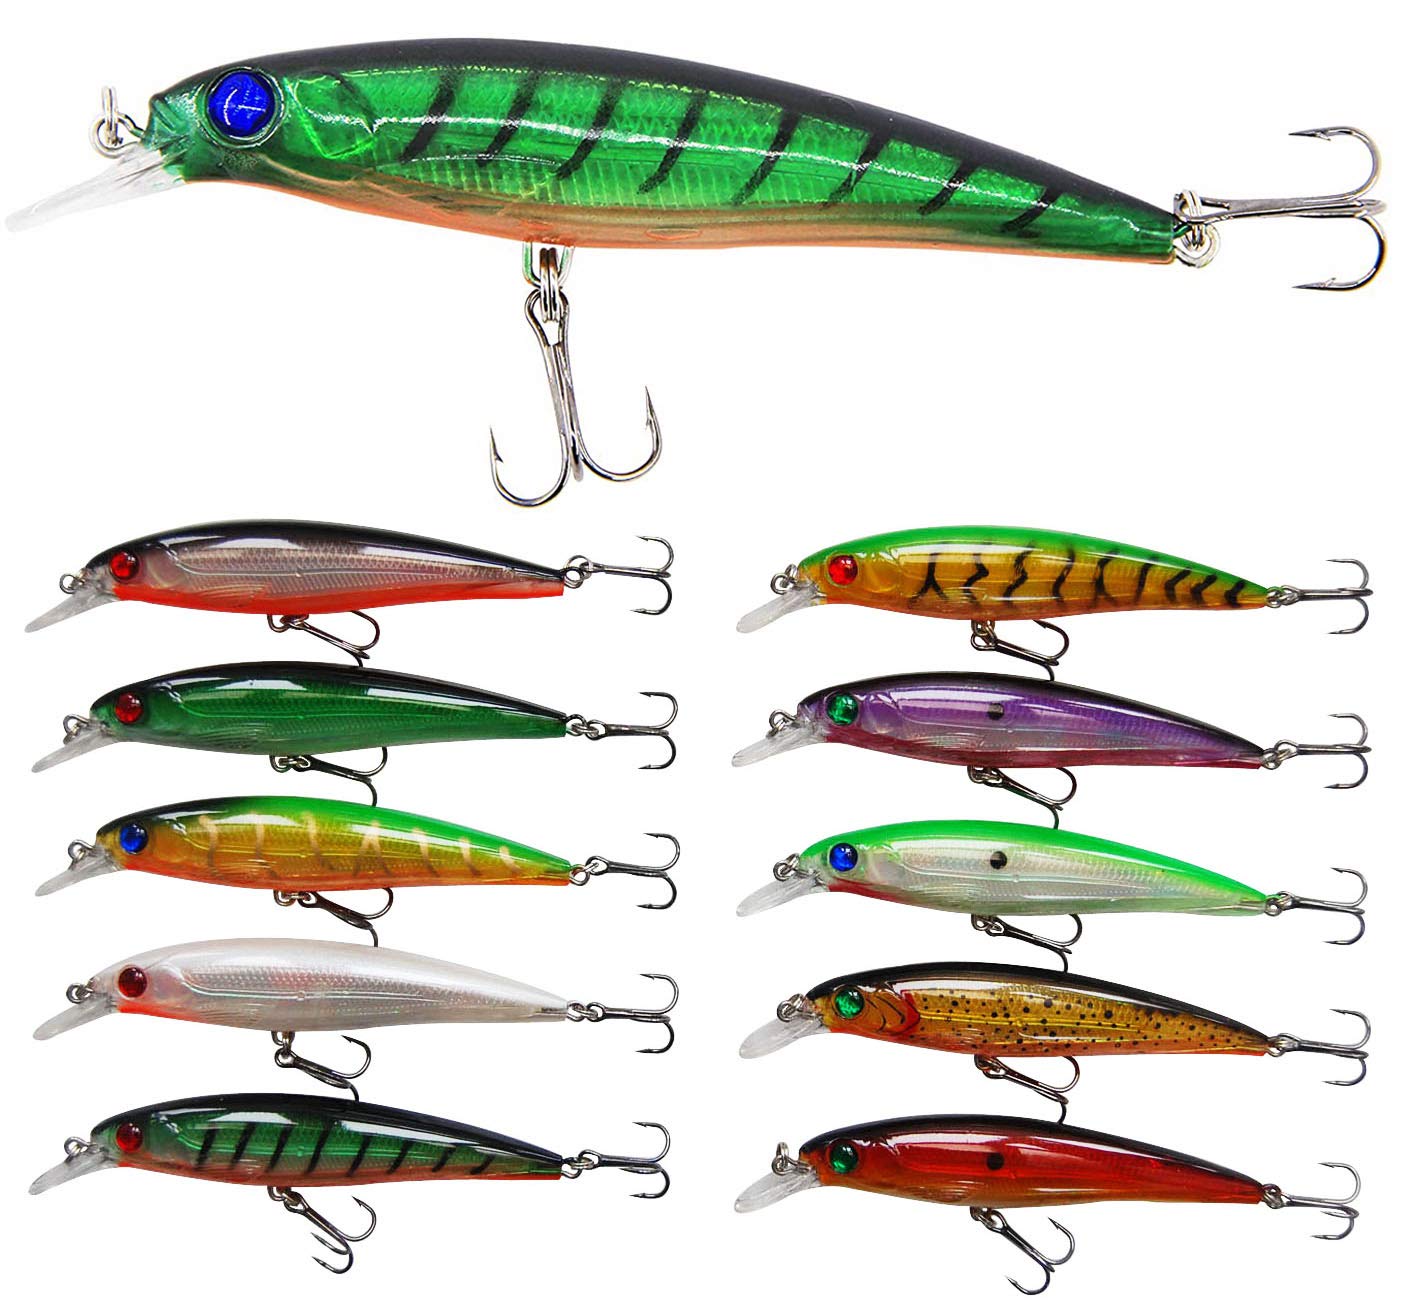 12x Metal Fishing Lures Sea Saltwater Trout Pike Perch Salmon Bass Tackle  Kit